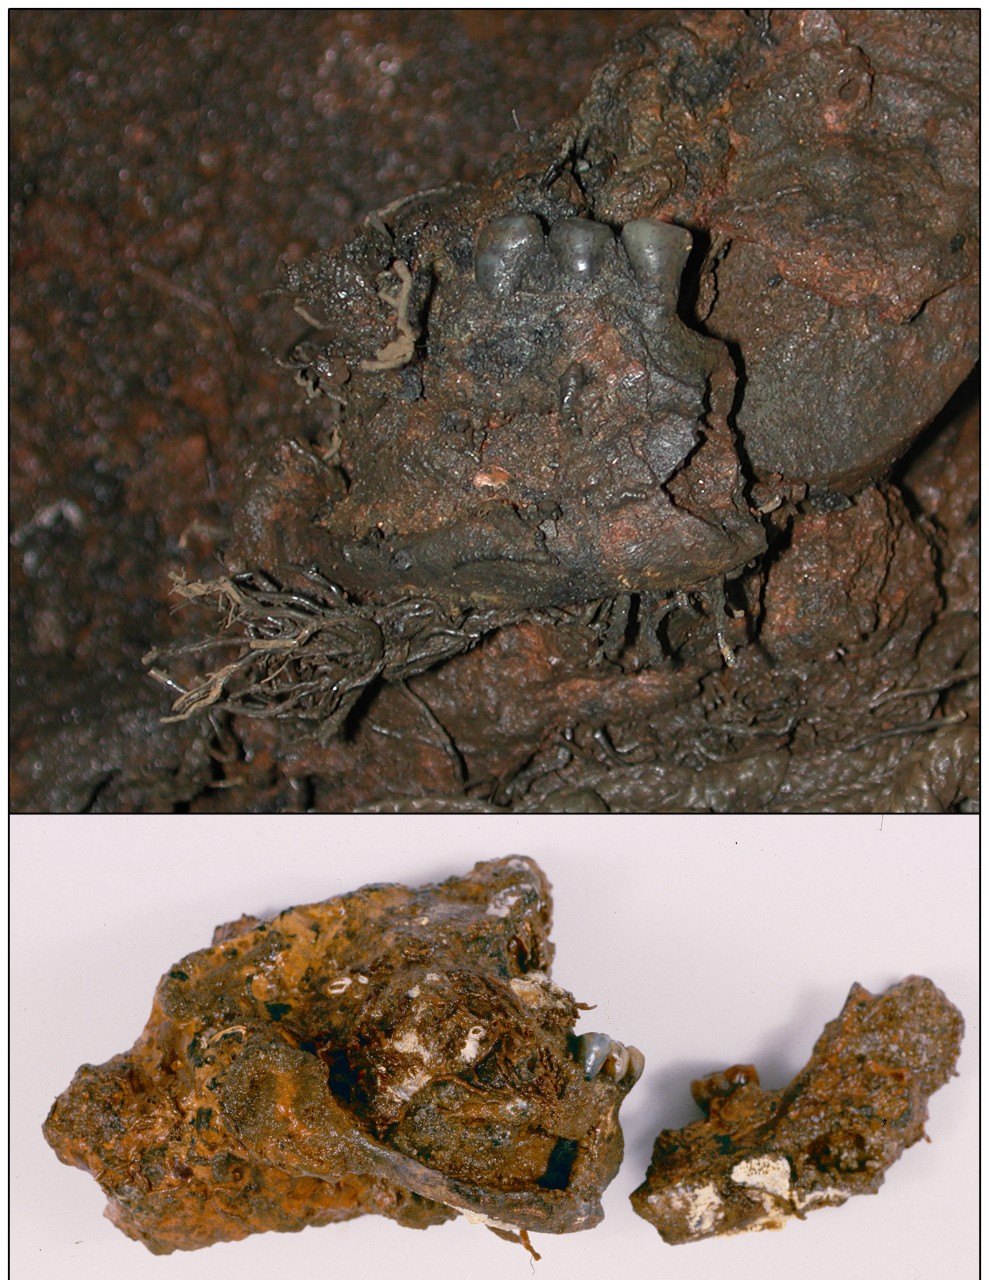 Two color photo of a partial human mandible. The top image shows the dark colored mandible with black teeth embedded in concretion still attached to a large cannon. The bottom shows two pieces of the mandible after removal from the cannon, still partially covered in concretion.